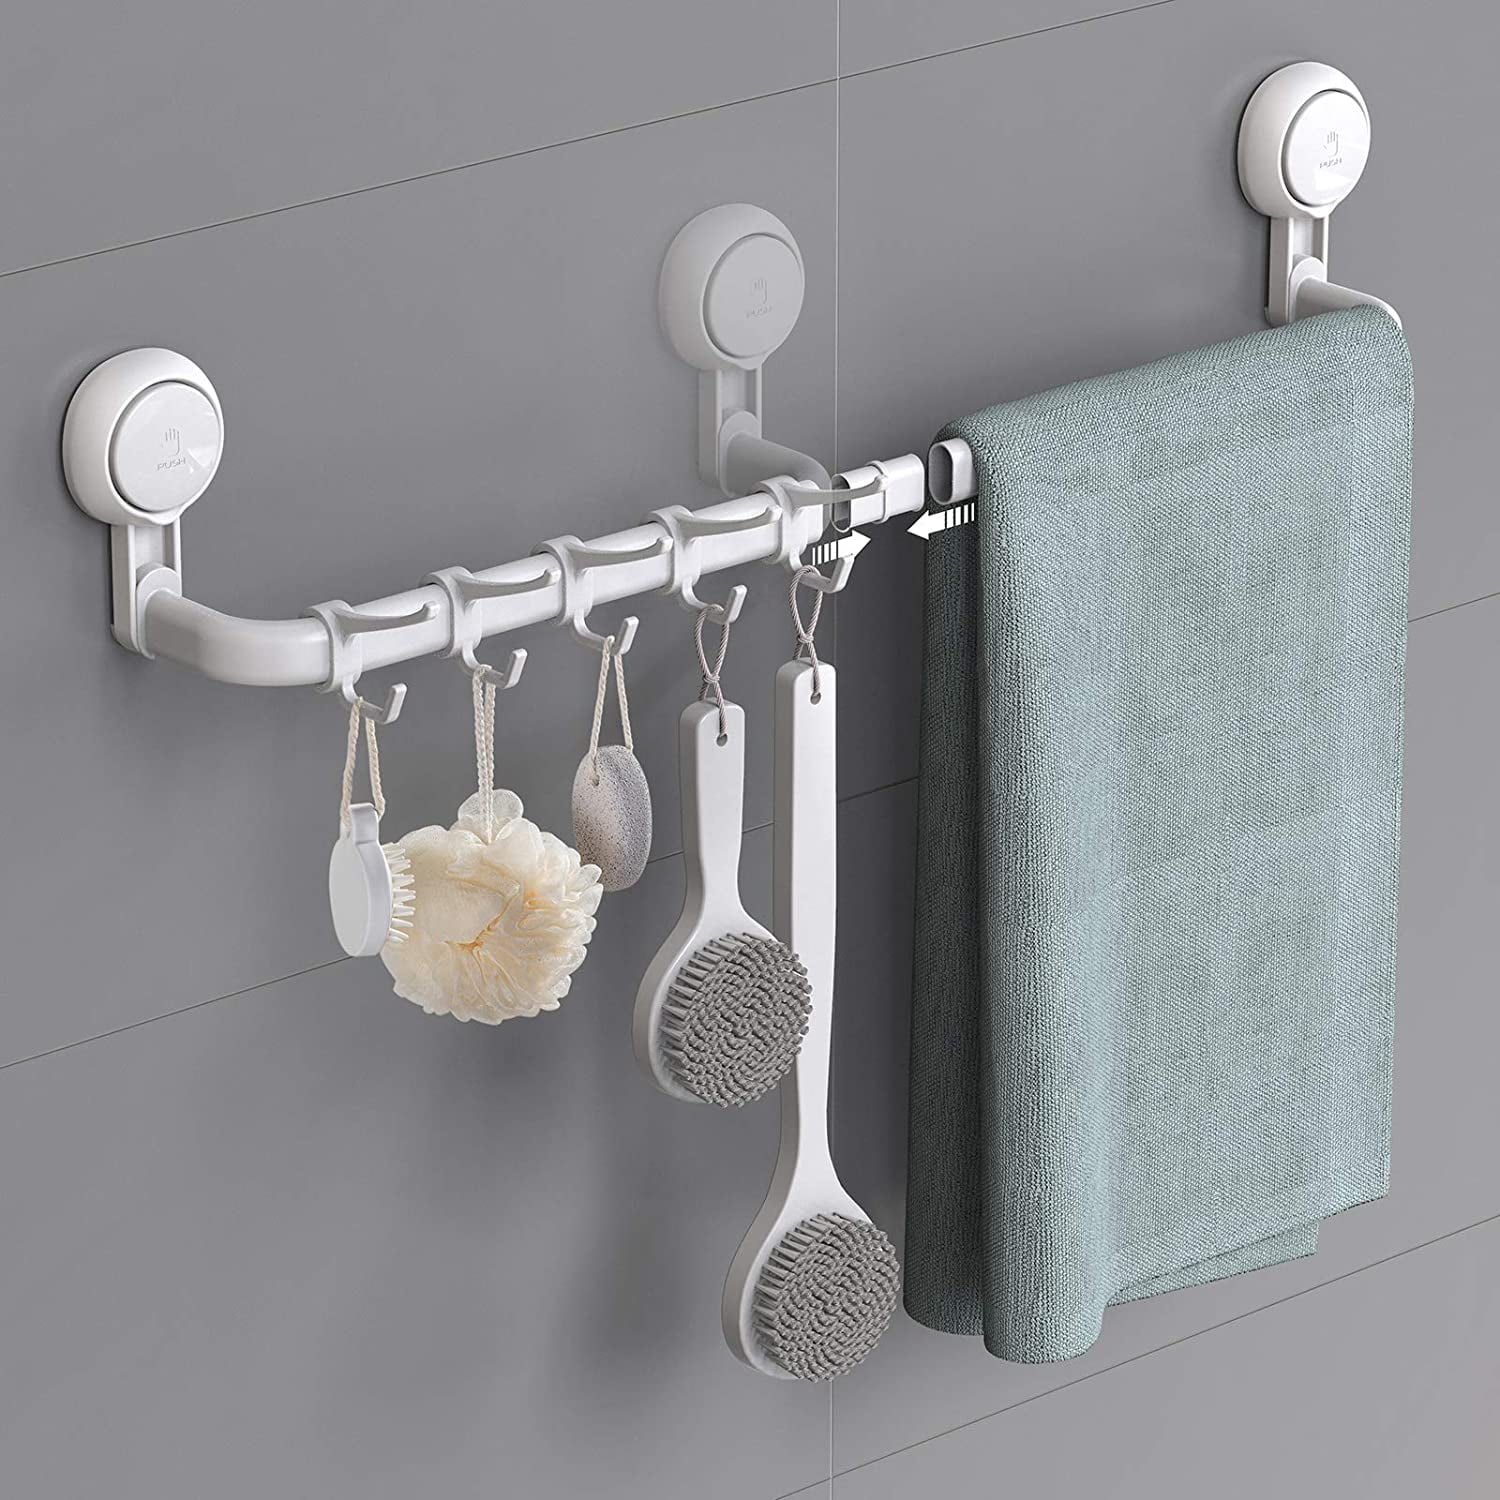 Goolsky Paper Towel Holder Tissue Dispenser Non Drilling Suction Cup Towel  Bar Bath Towel Clothes Hanger Wall Mount Towel Rack Holder for Bathroom  Kitchen price in UAE,  UAE